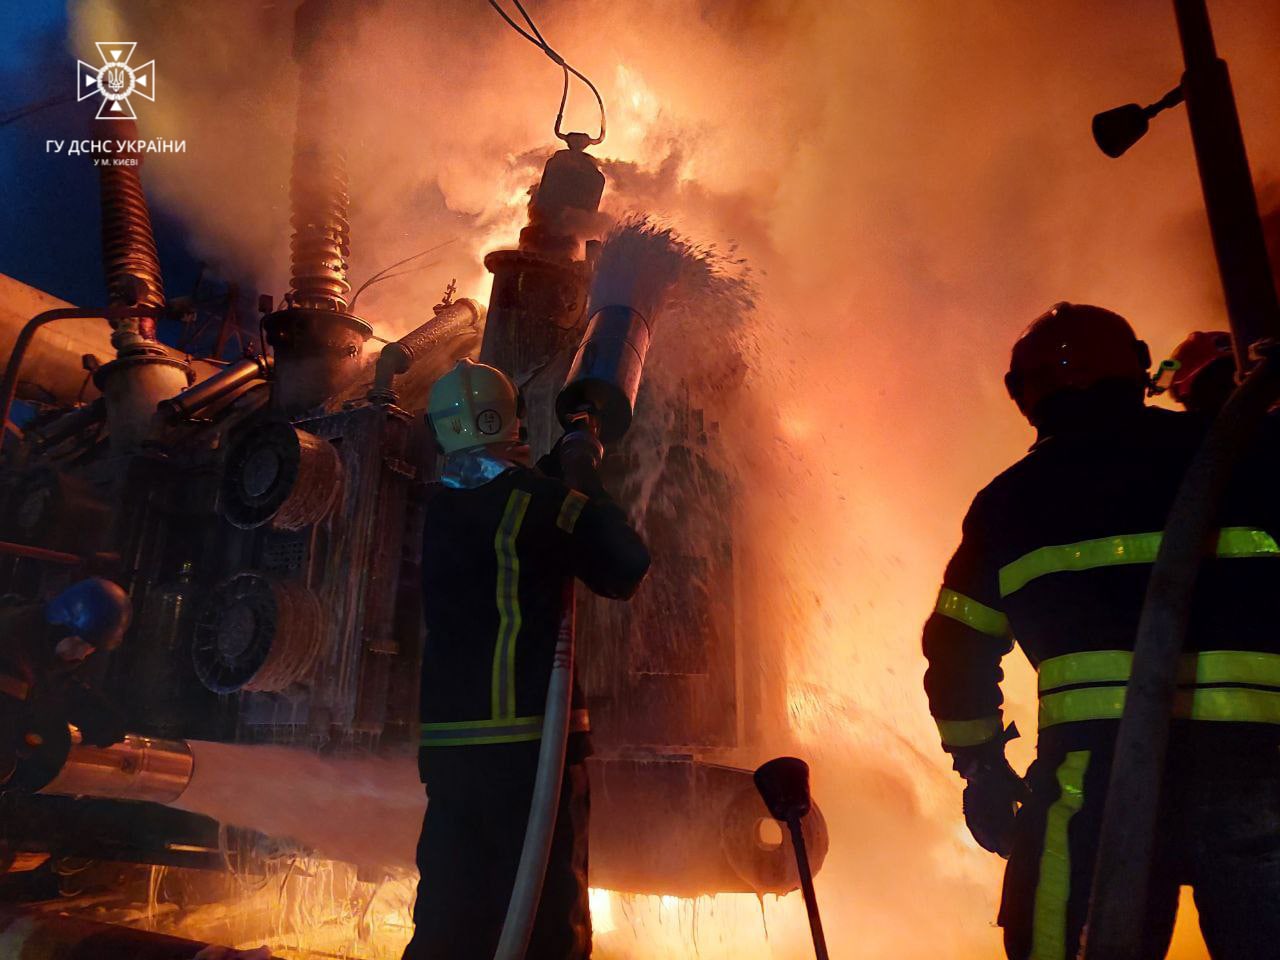 Ukrainian firefighters extinguish fire that broke out at a power supply facility after a russian missile strike, December 2022 / Photo credit: State Emergence Service of Ukraine